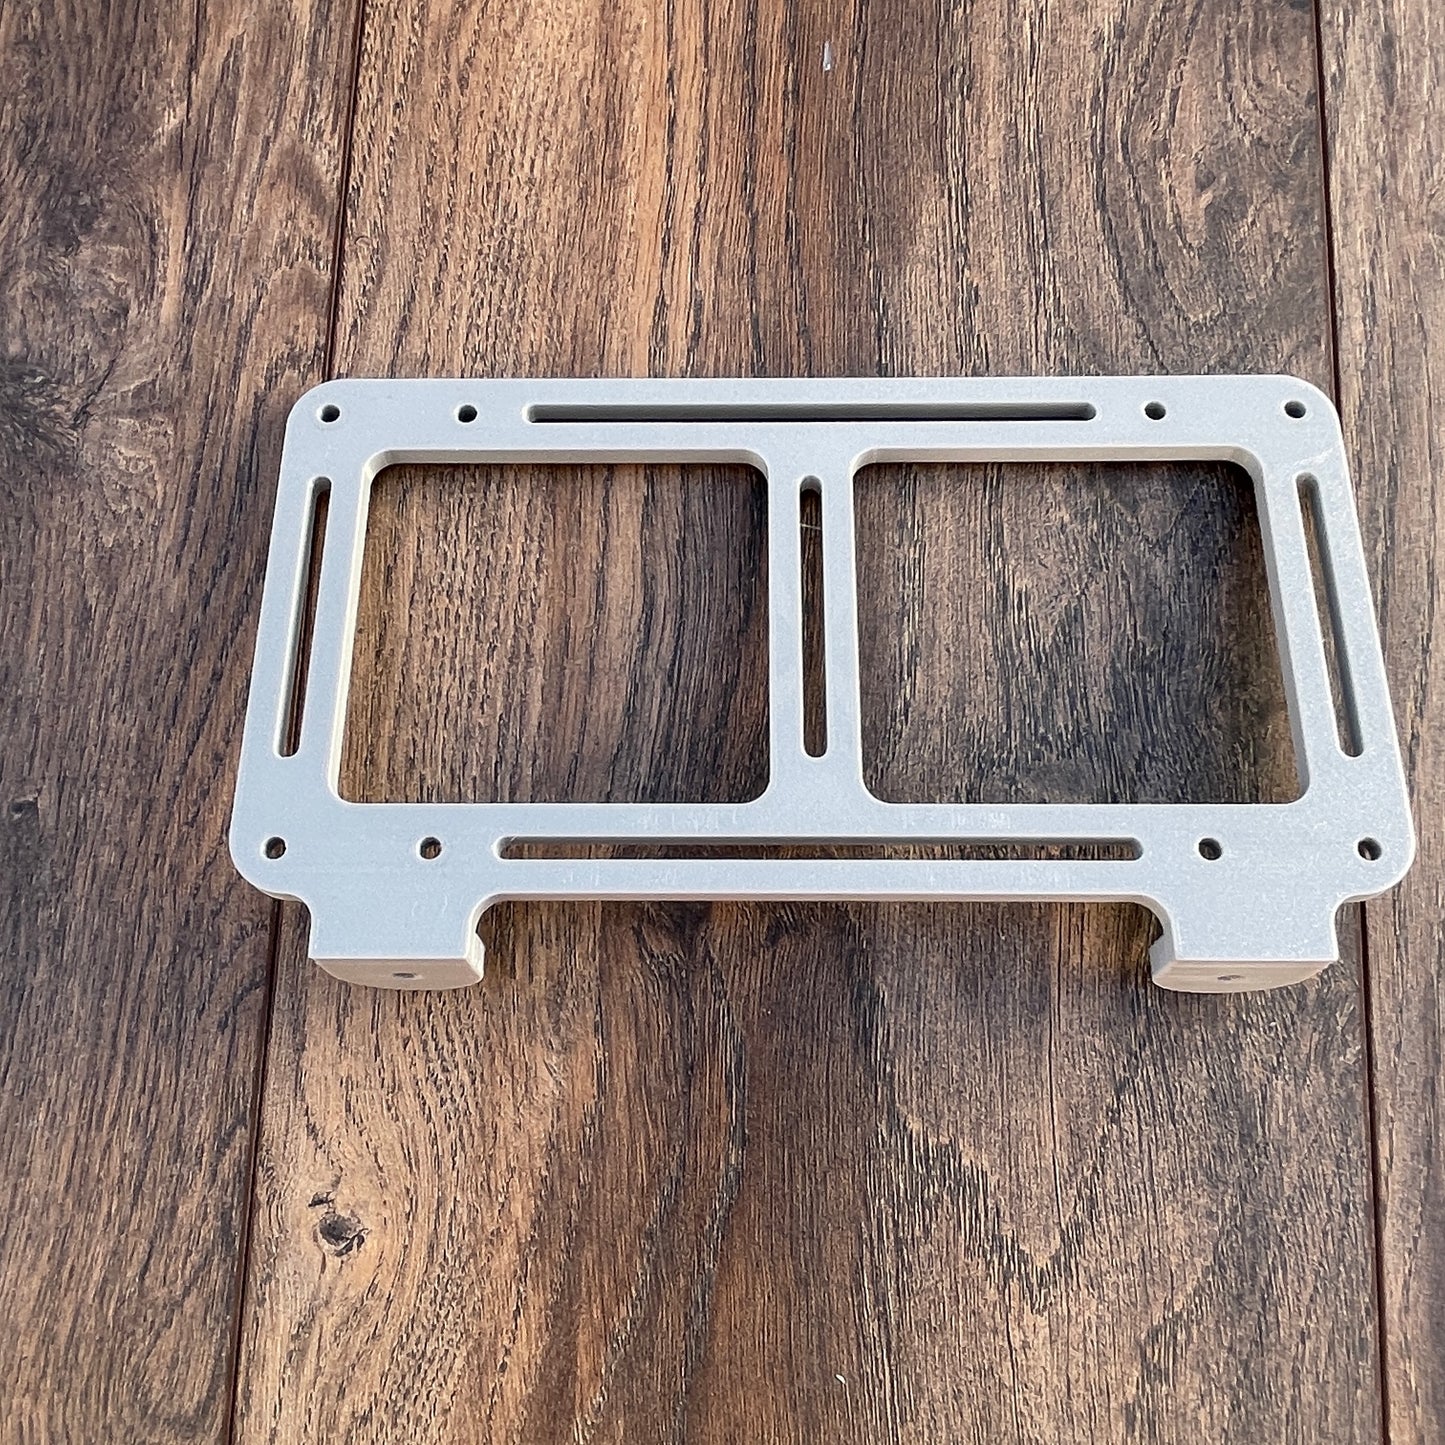 Stacked or Staggered PSU Controller Mounting Bracket